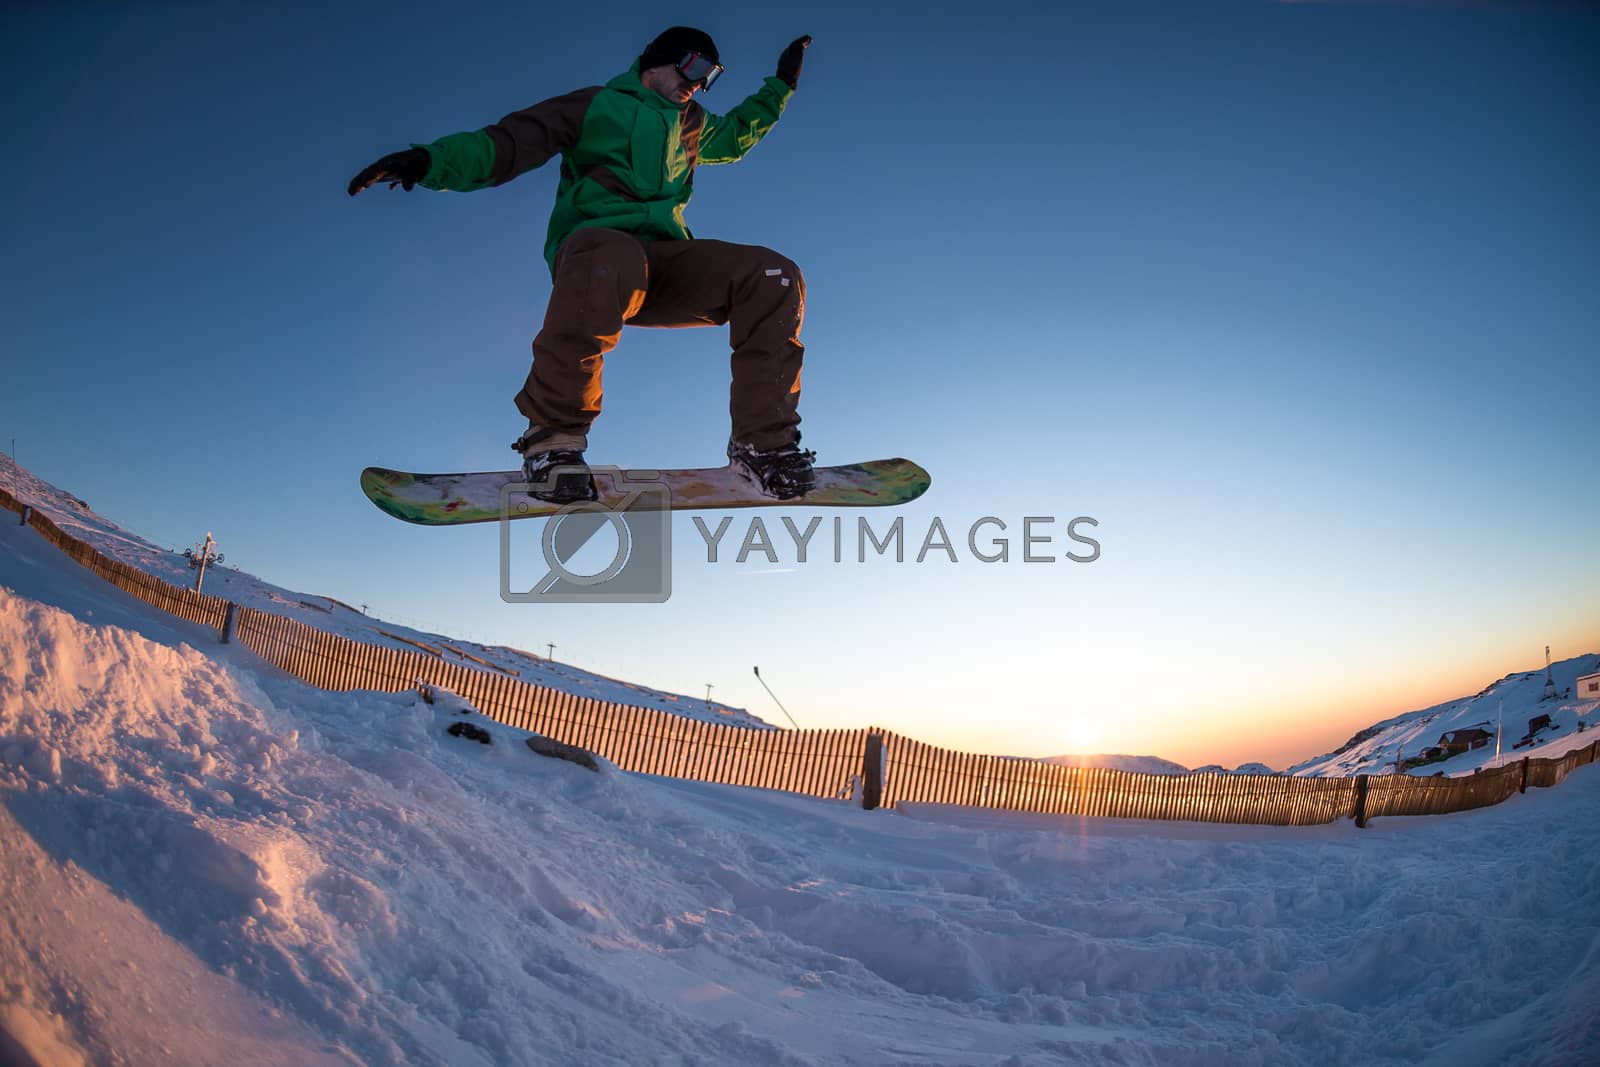 Royalty free image of Snowboarding in the mountains by homydesign